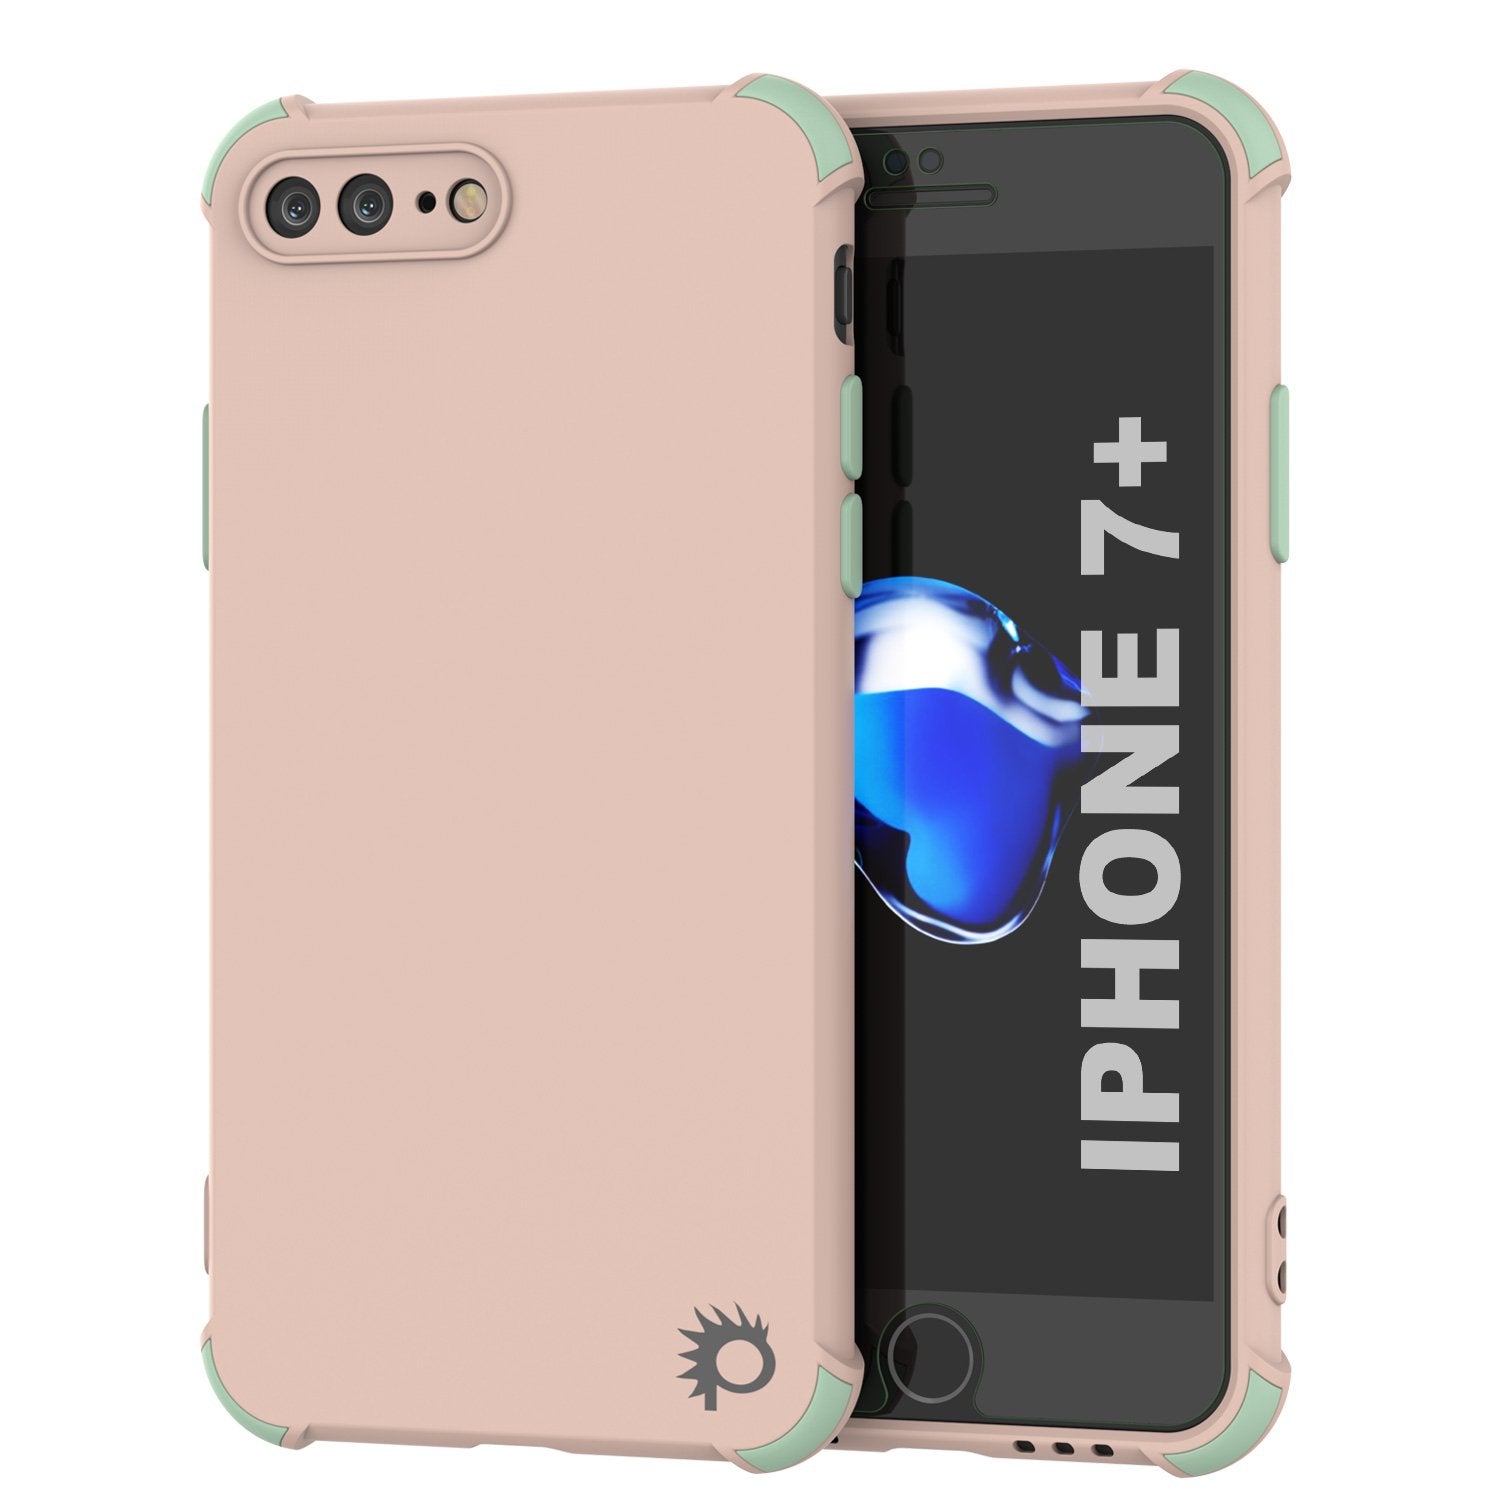 Punkcase Protective & Lightweight TPU Case [Sunshine Series] for iPhone 7+ Plus [Pink]